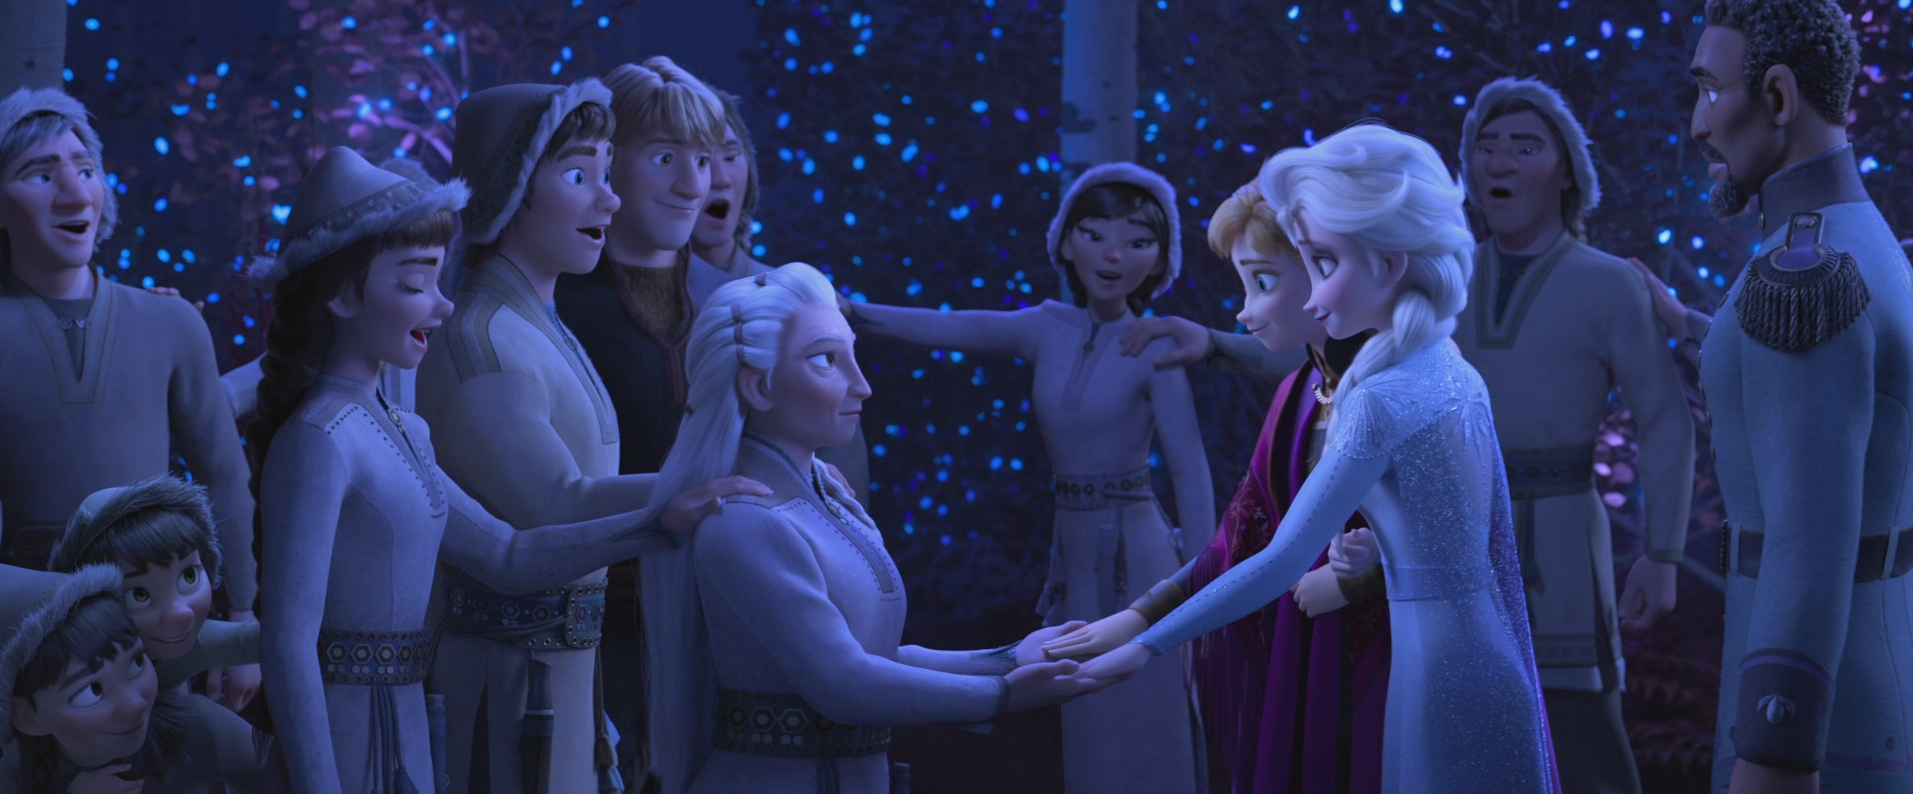 Anna and Elsa join hands with Yelena in the middle of a circle of singing Northuldra people.